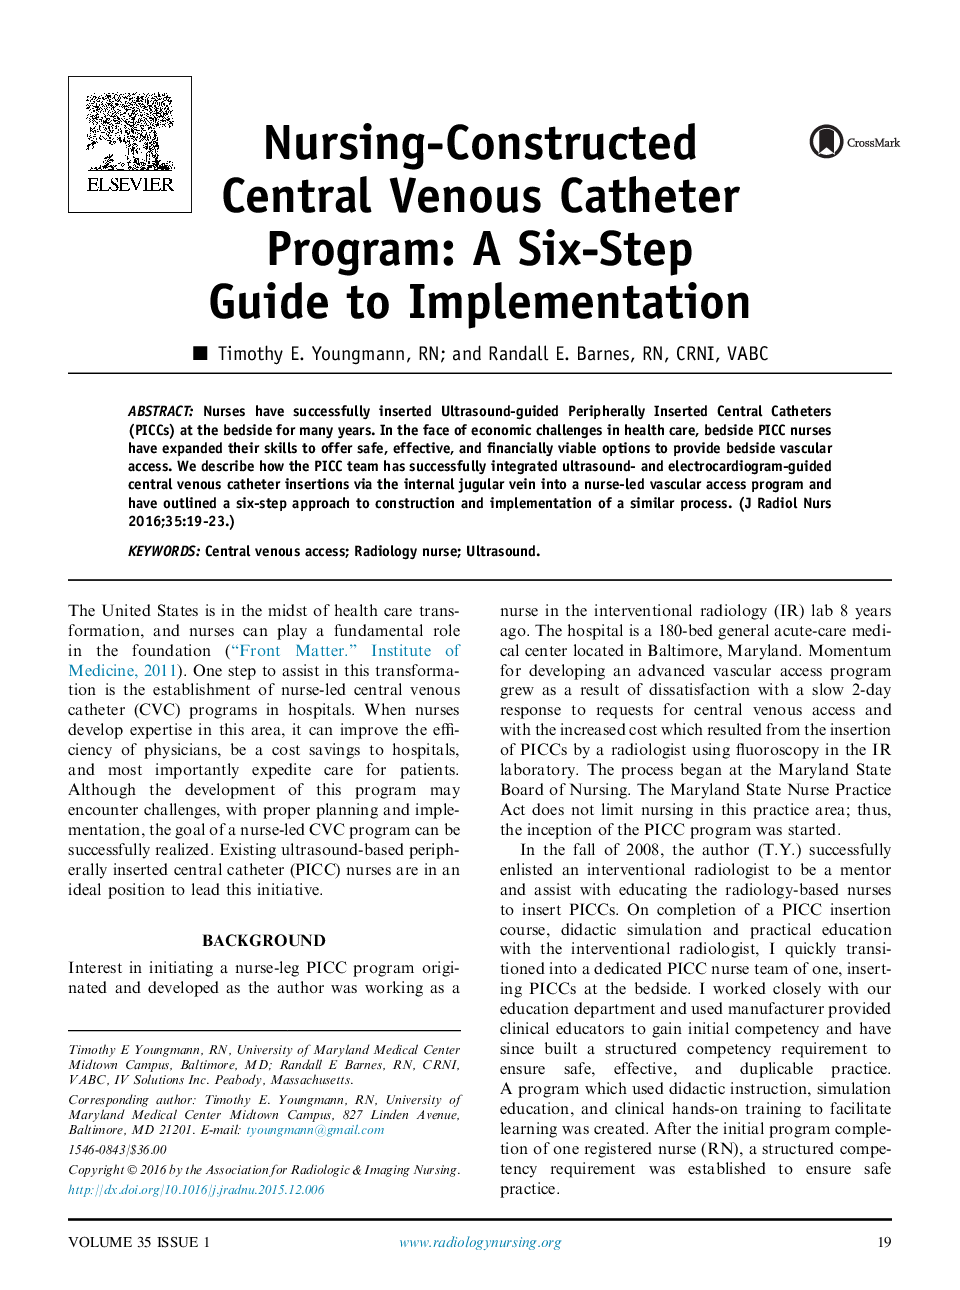 Nursing-Constructed Central Venous Catheter Program: A Six-Step Guide to Implementation